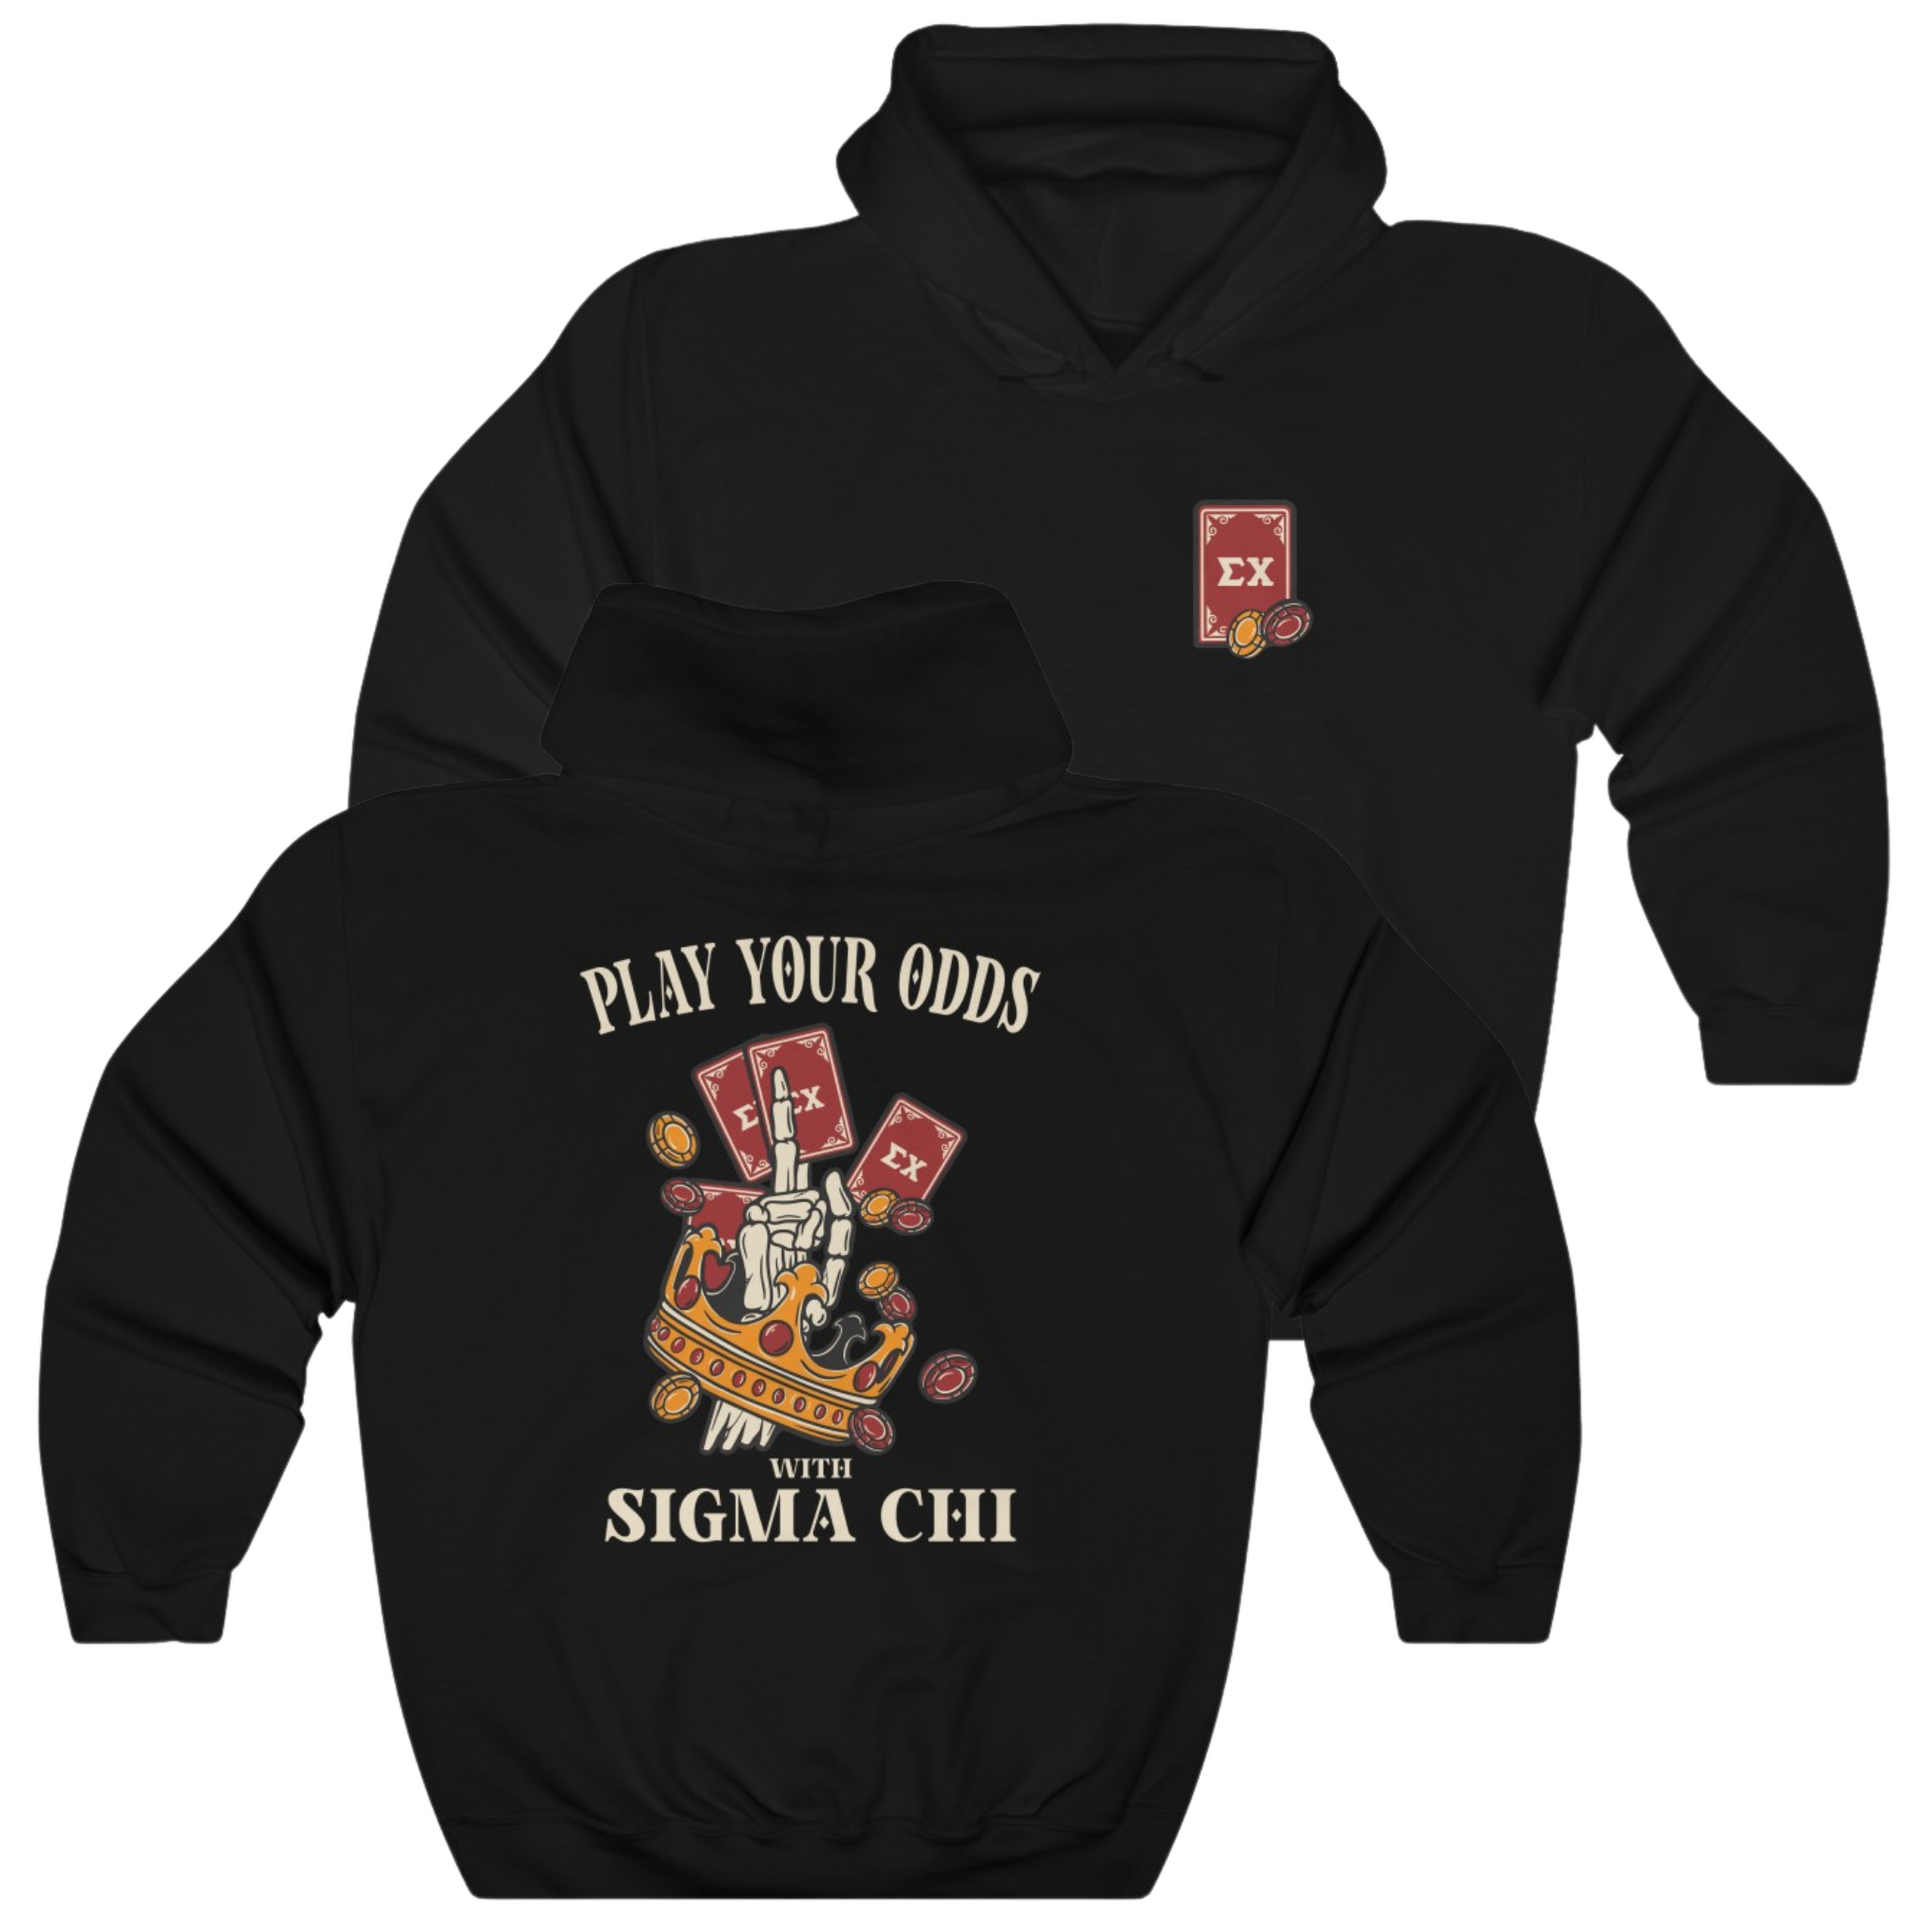 Black Sigma Chi Graphic Hoodie | Play Your Odds | Sigma Chi Fraternity Merch House